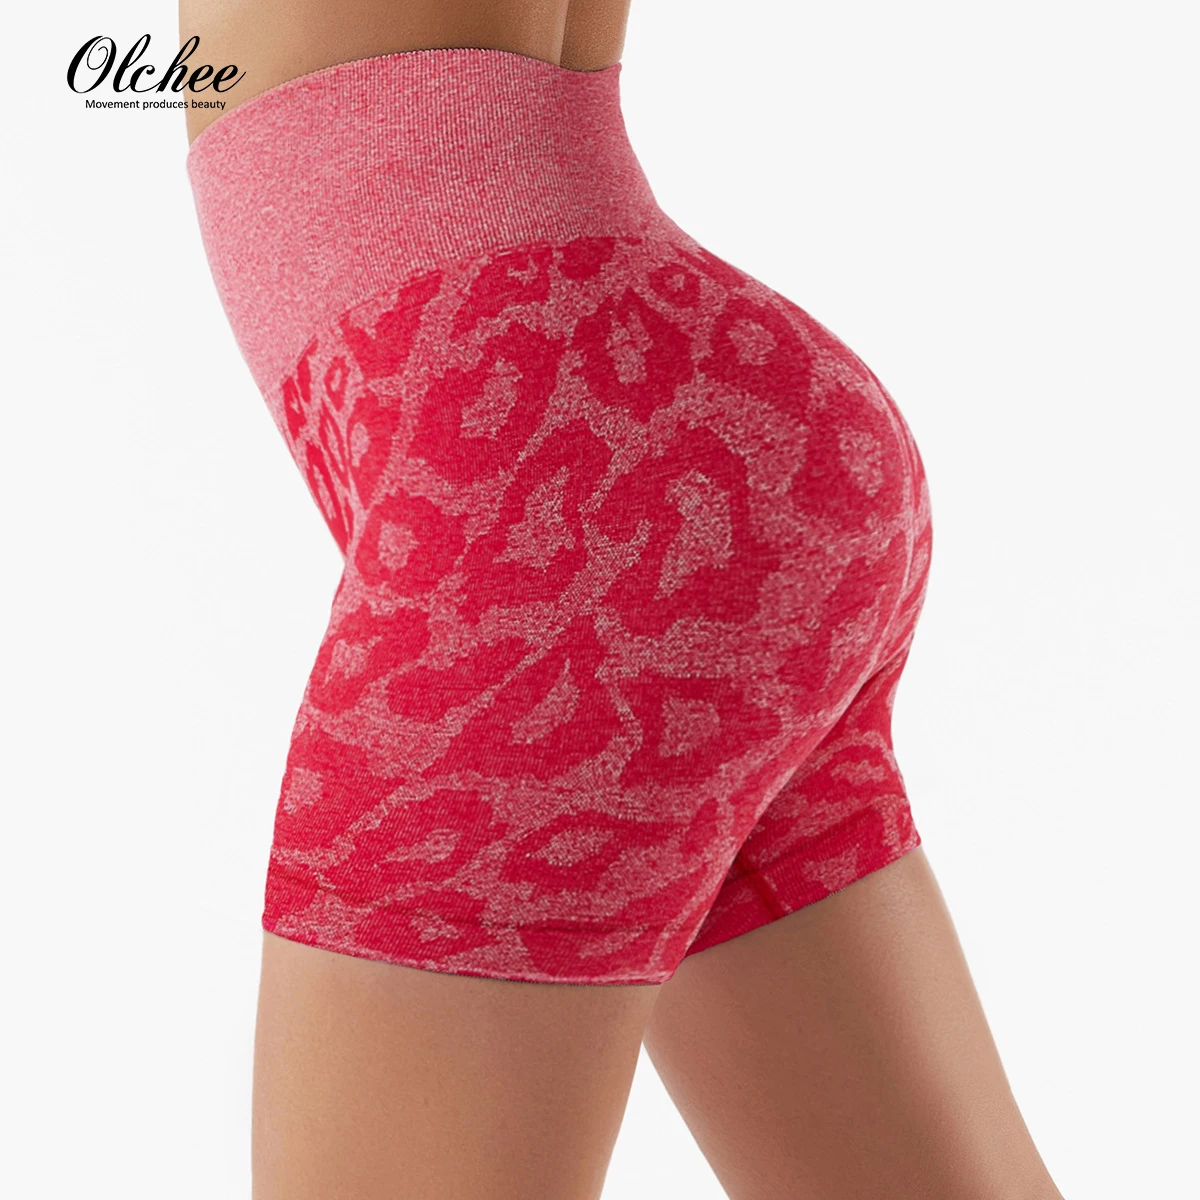 

OLCHEE Gym Yoga Shorts Seamless High Waist Women's Shorts Camouflage Fitness Sport Short Leggings Cycling Shorts Safety Pants